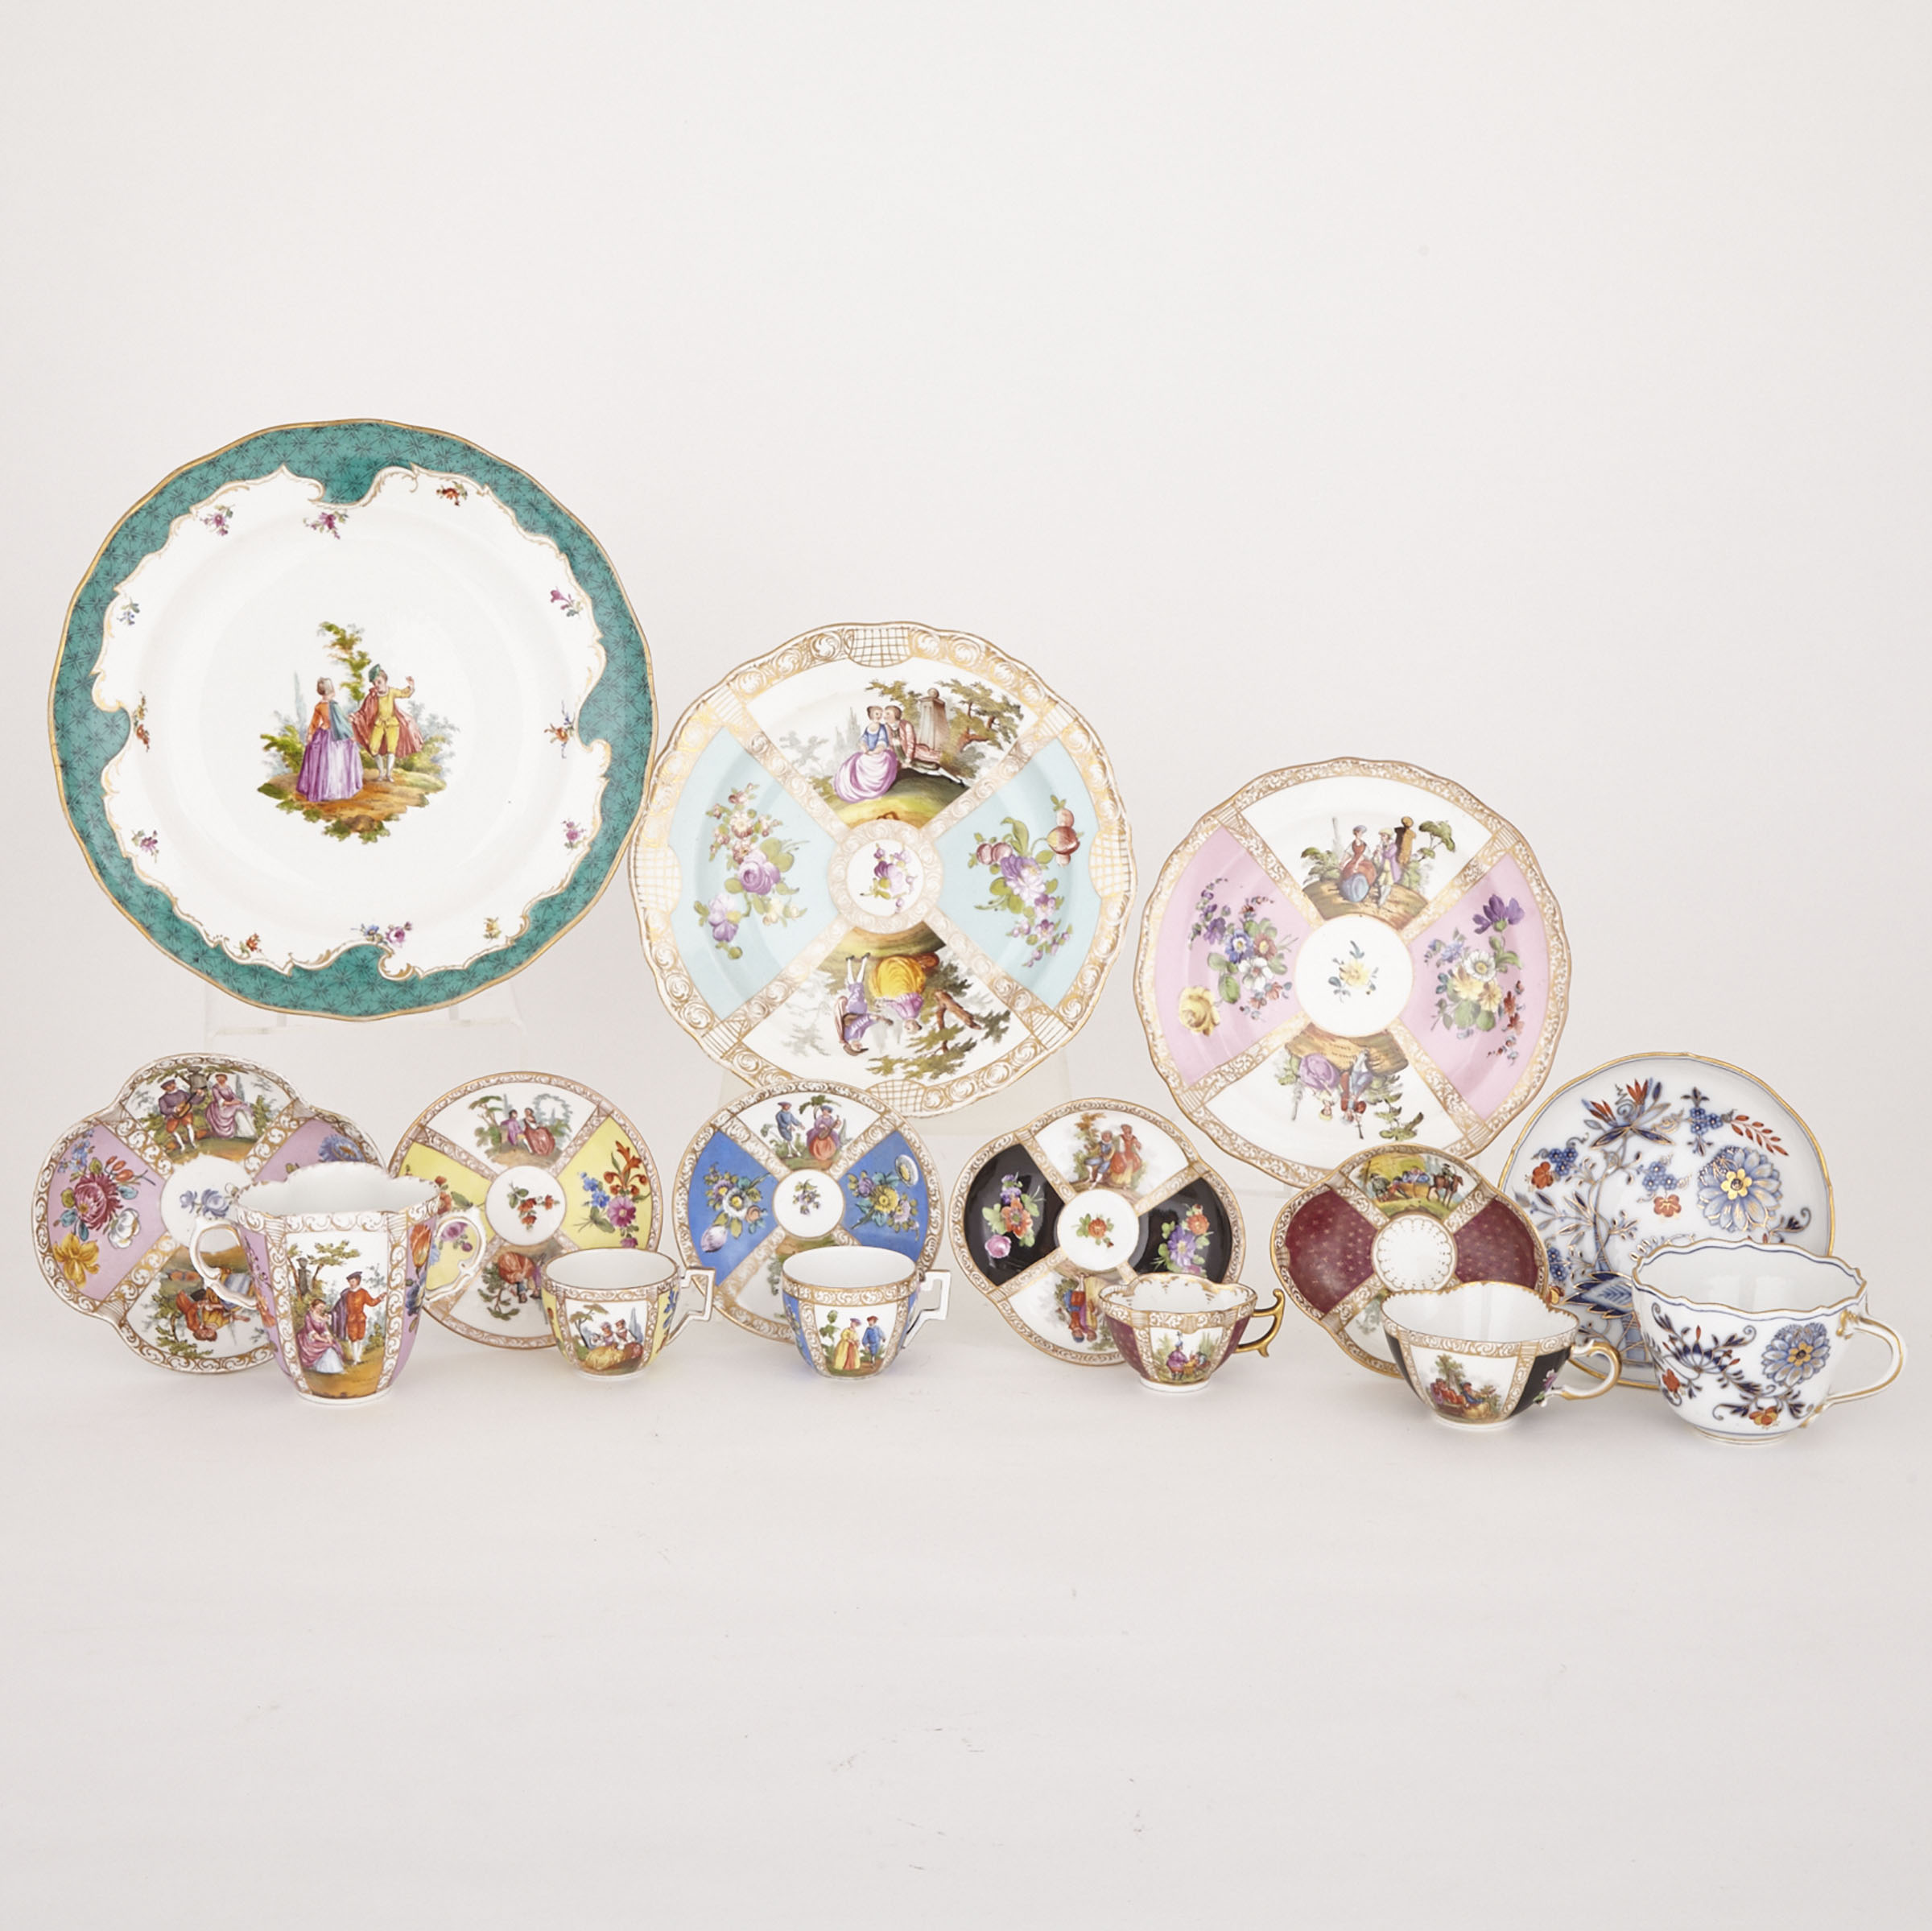 Group of Meissen and Dresden Cups, Saucers and Plates, late 19th/early 20th century